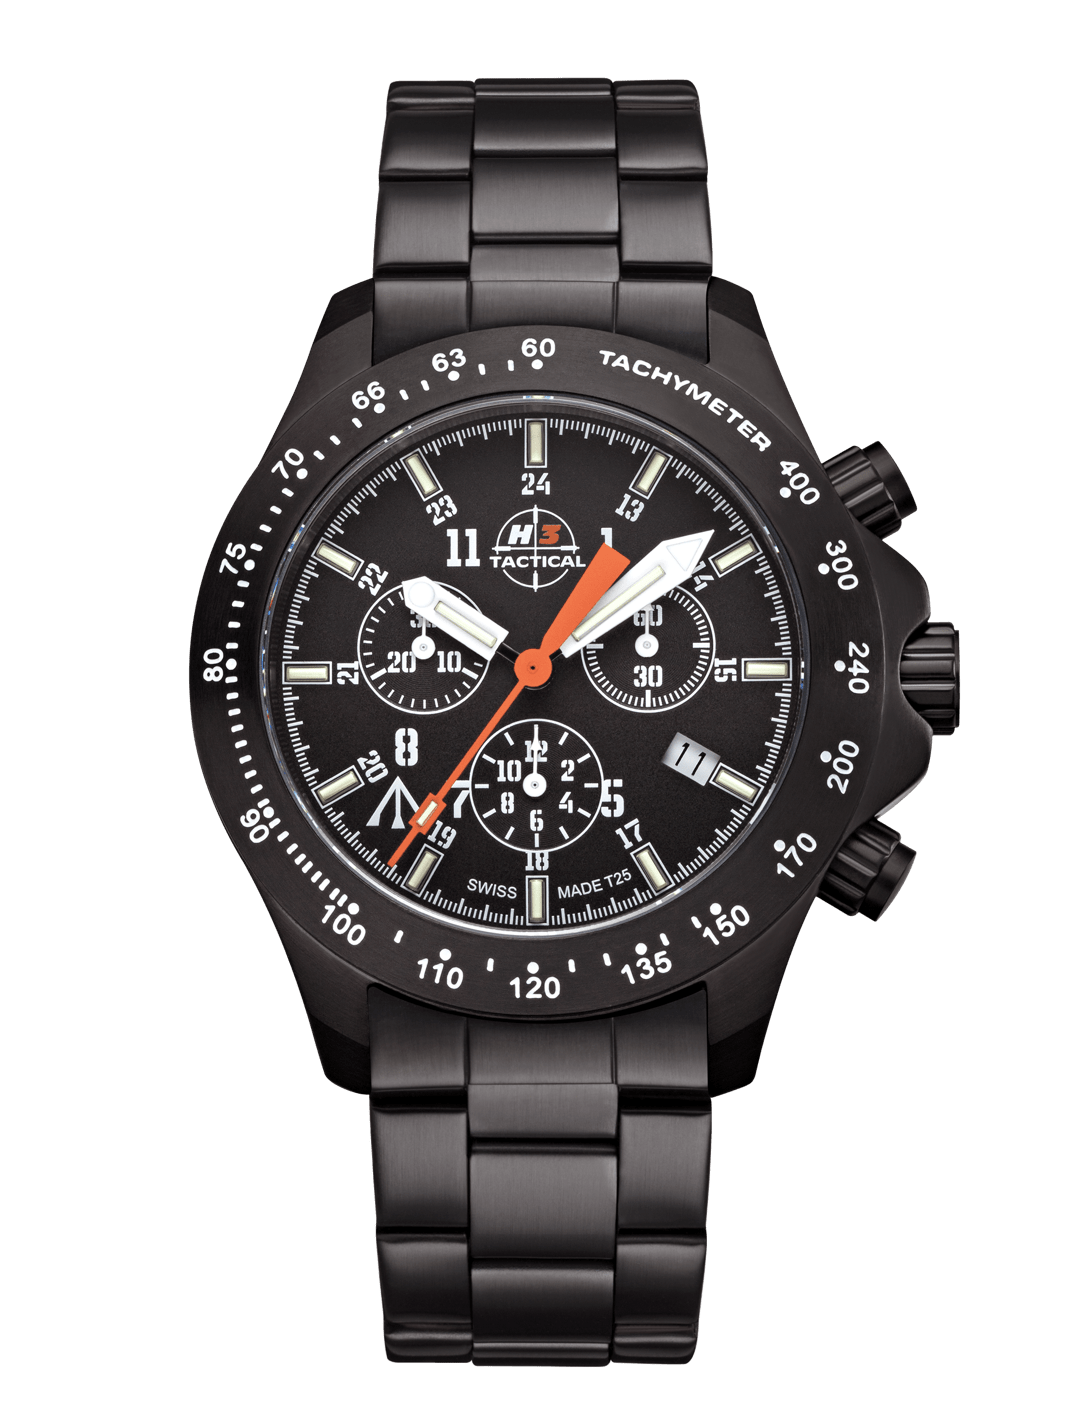 H3TACTICAL Trooper Chronograph H3 Uhr mit Edelstahlband